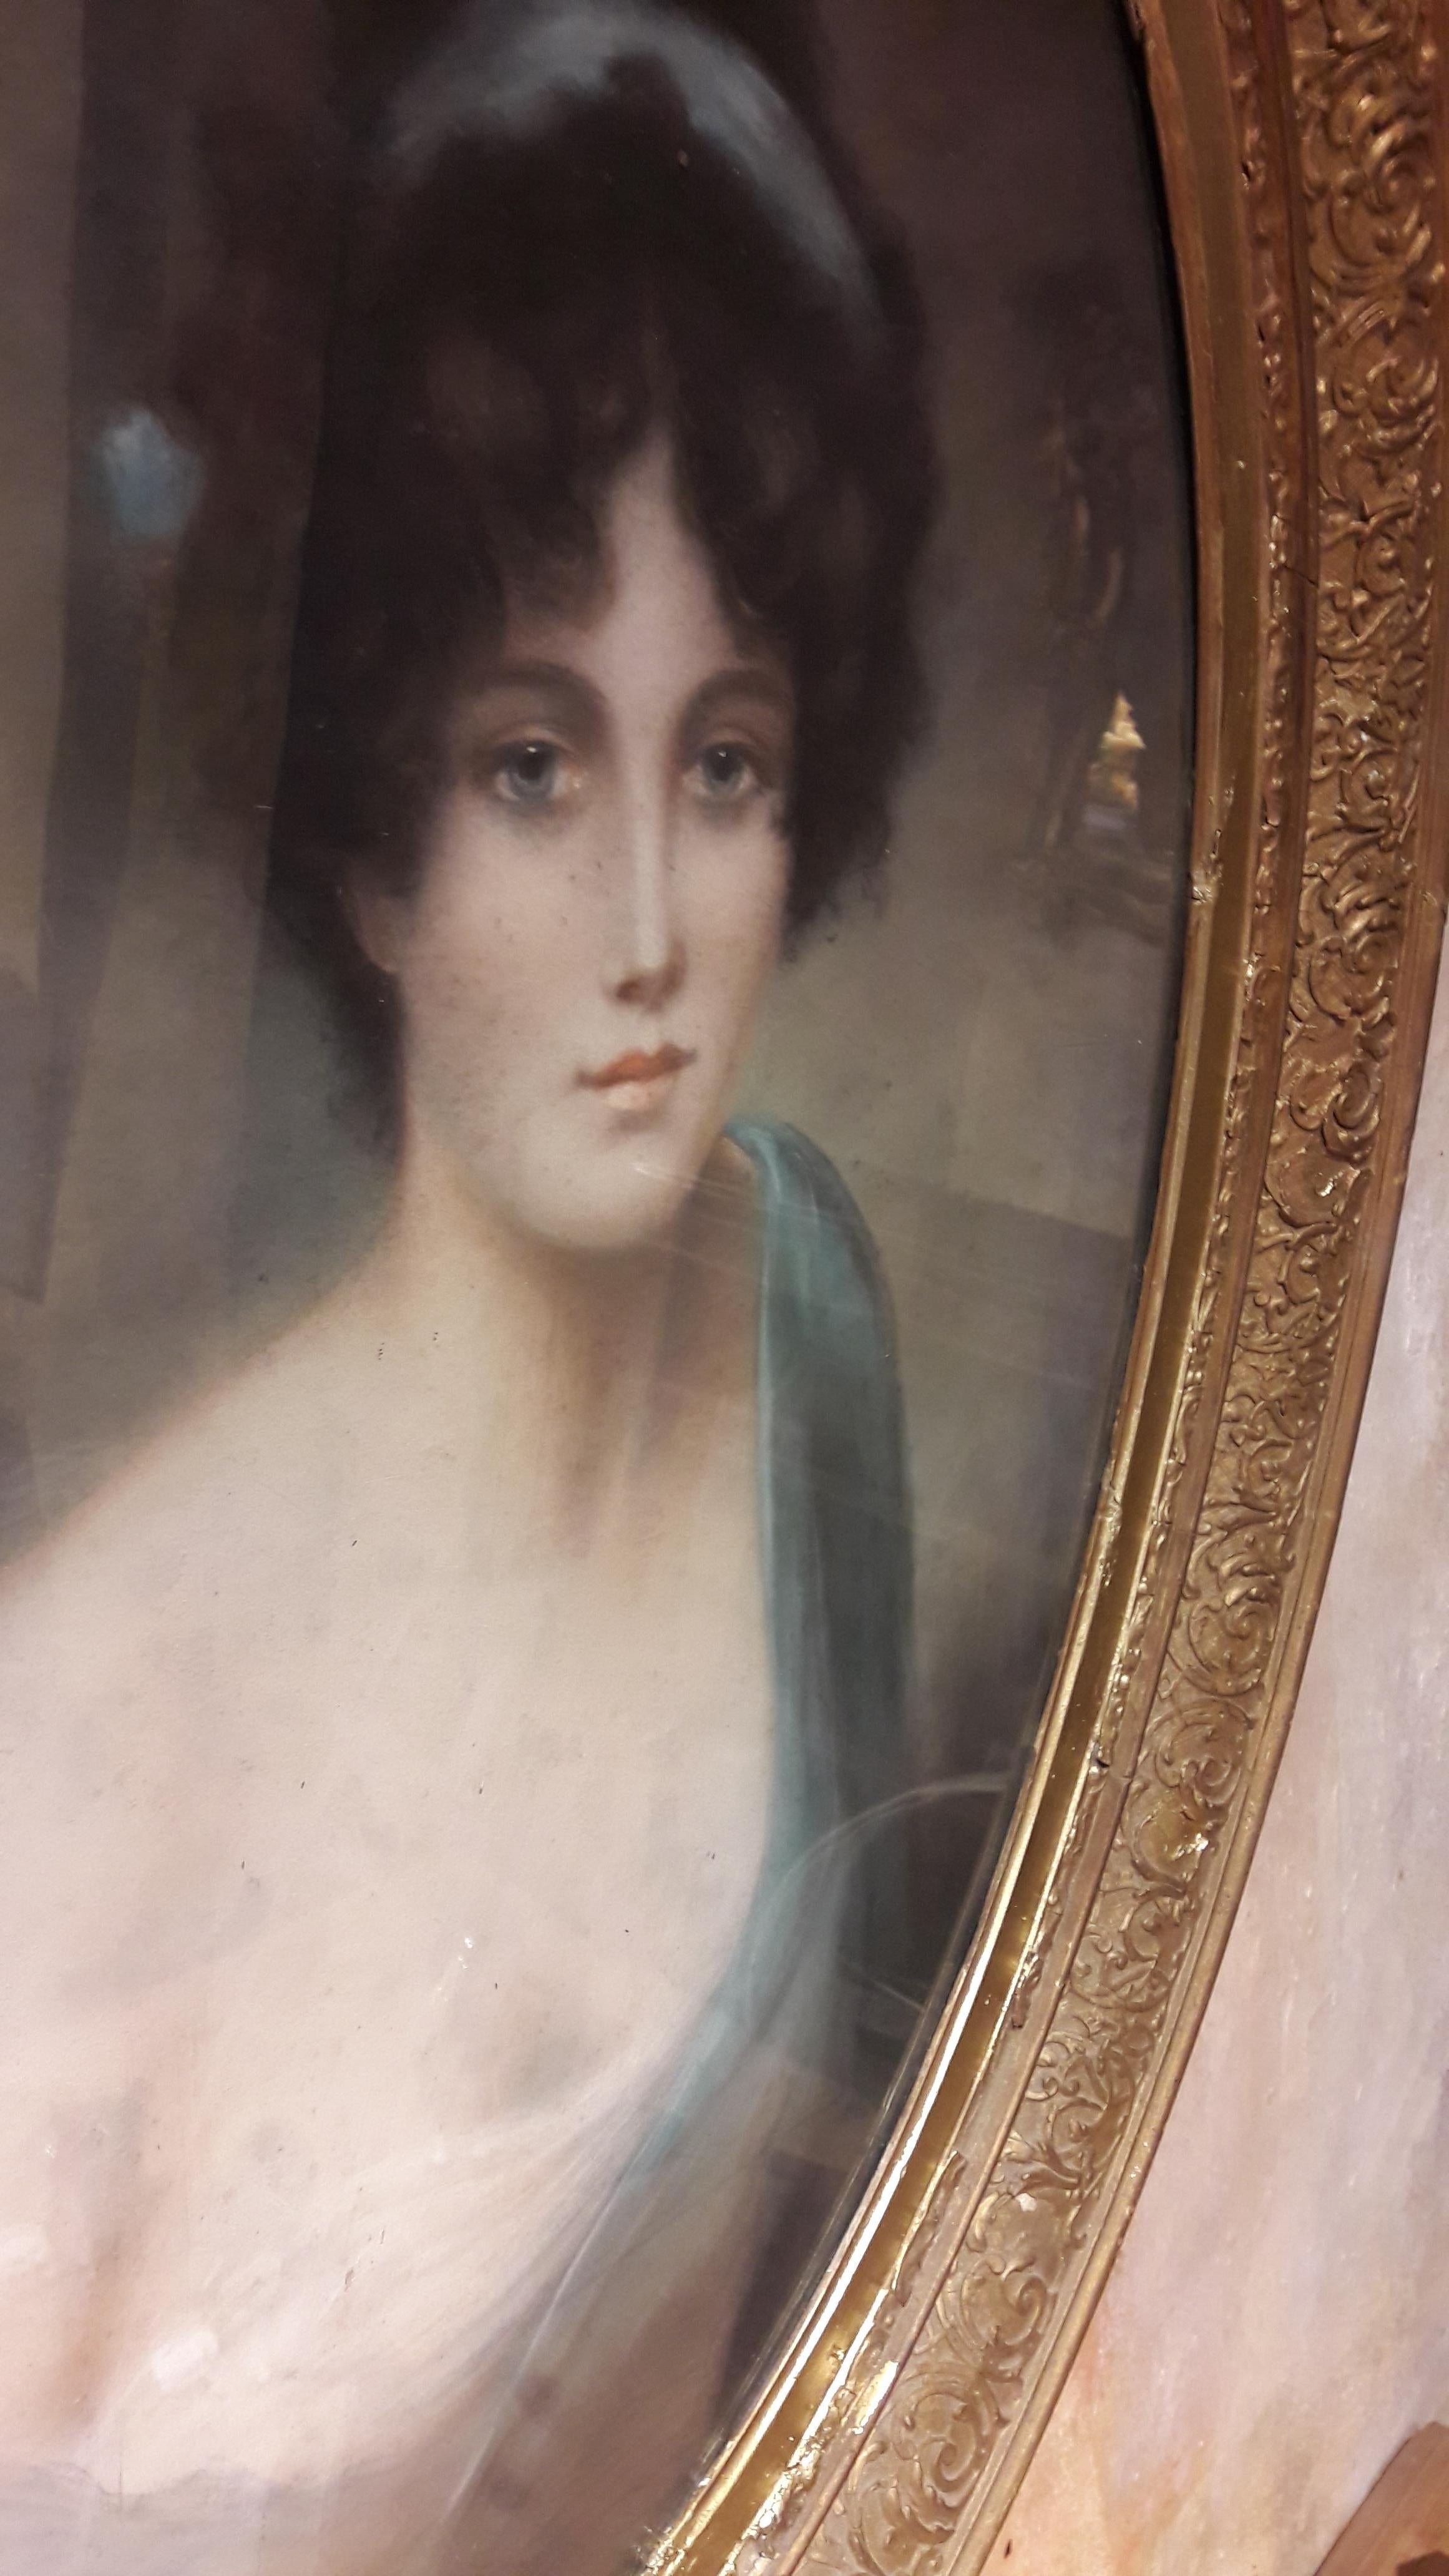 Intriguing pastel of a lady. Great colors, typically 19th century English school.
You can see on the pictures that the frame in quite damaged.